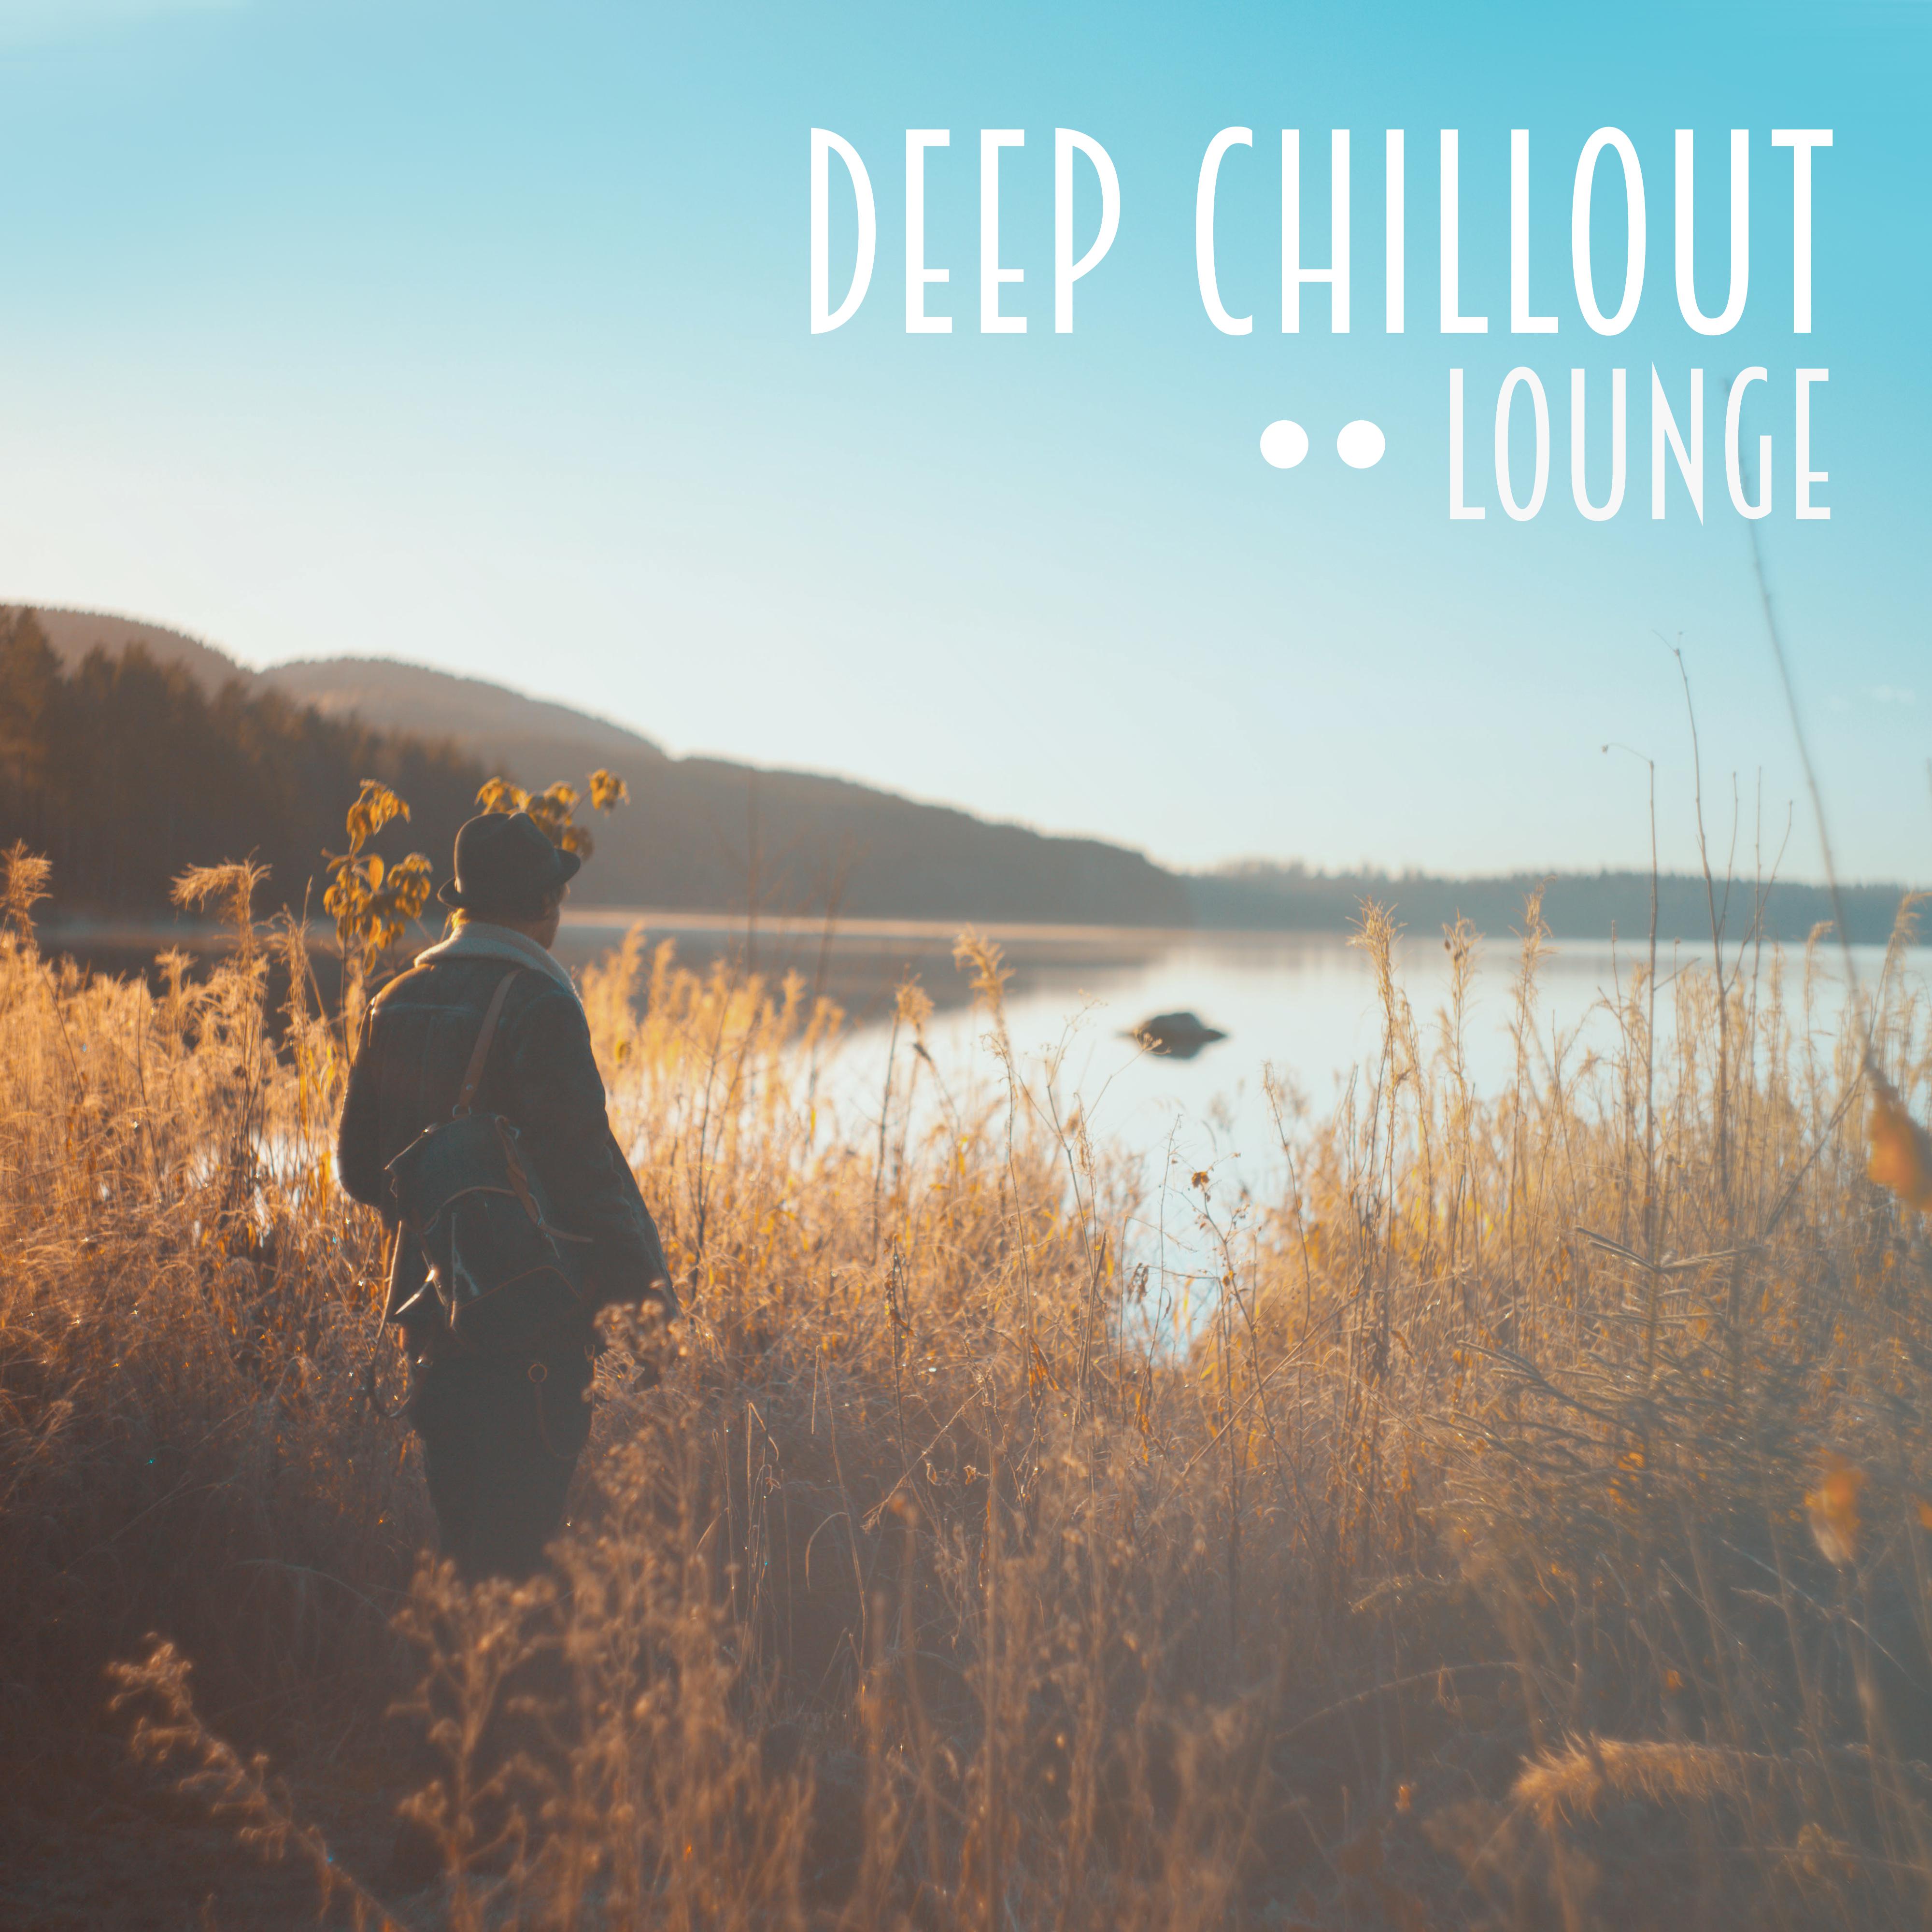 Deep Chillout Lounge (Spa, Bath, Relax, Rest, Erotic Massage, ***)